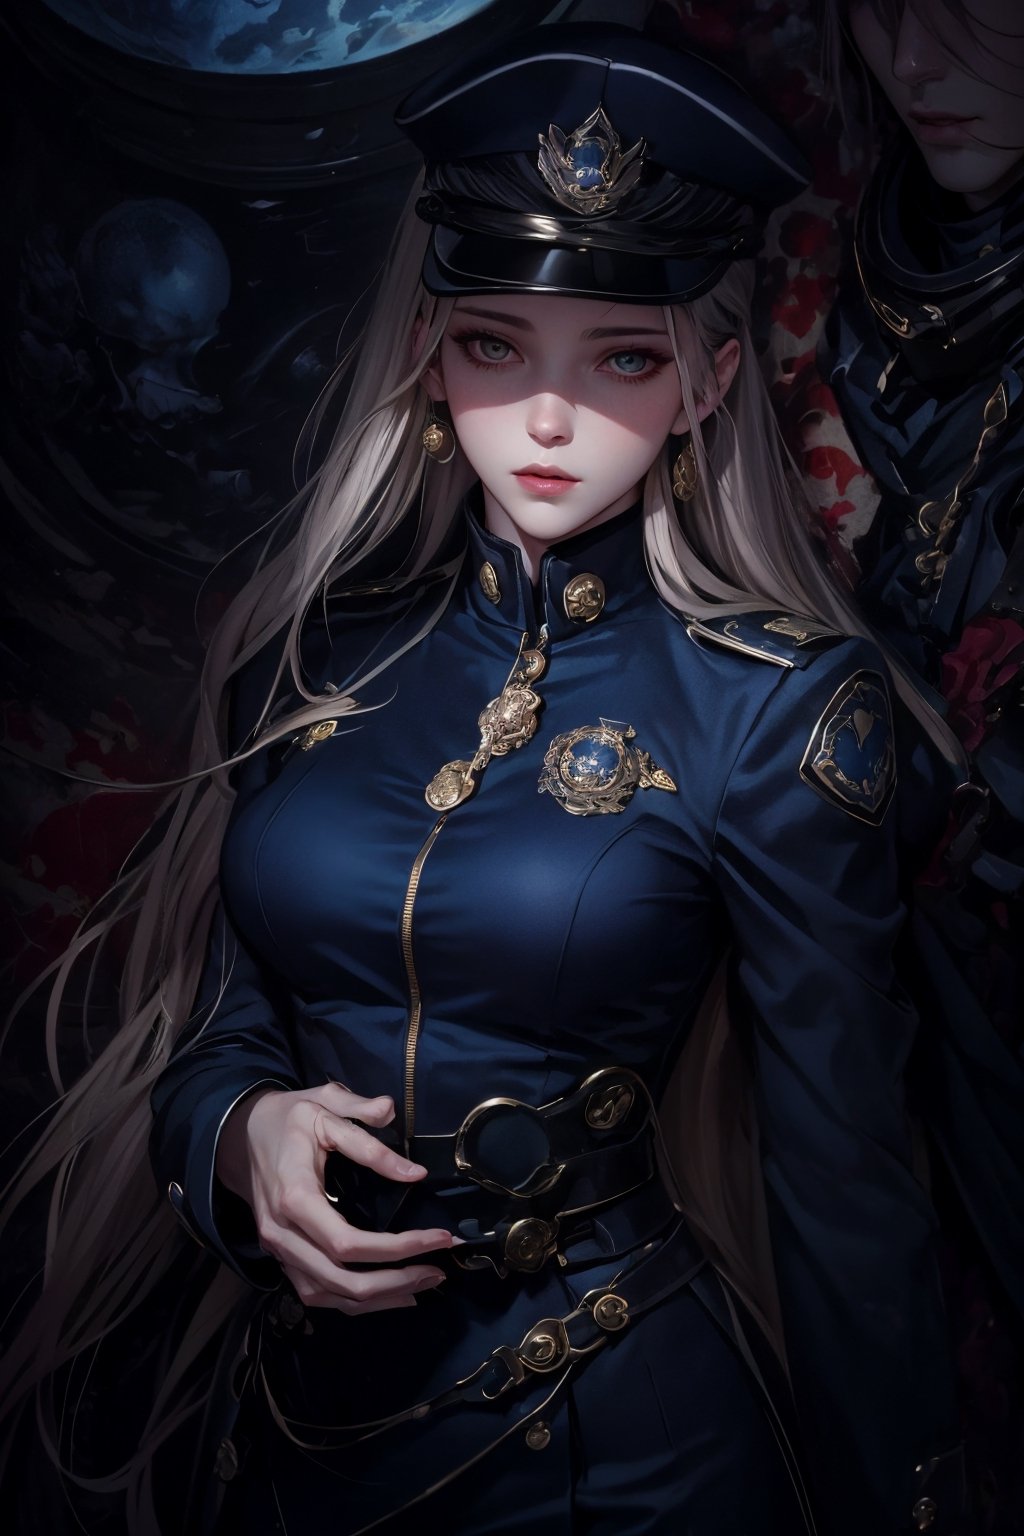 Create an image of a female character in a futuristic military uniform, with long, silky golden hair in gentle waves down to her waist. Her large, luminous amber eyes should be framed by delicate lashes, with porcelain-like skin and a hint of blush on her cheeks. The uniform should be deep ocean blue with bright golden touches and distinctive badges on the shoulders to highlight her position. Her left hand should be delicately supporting a realistic globe, showcasing her protective yet firm demeanor. The backdrop should be a blend of soft and technological elements, reflecting her dual nature of tenderness and determination. The art style should be in the aesthetic of high-detail anime, with a vertical aspect ratio.